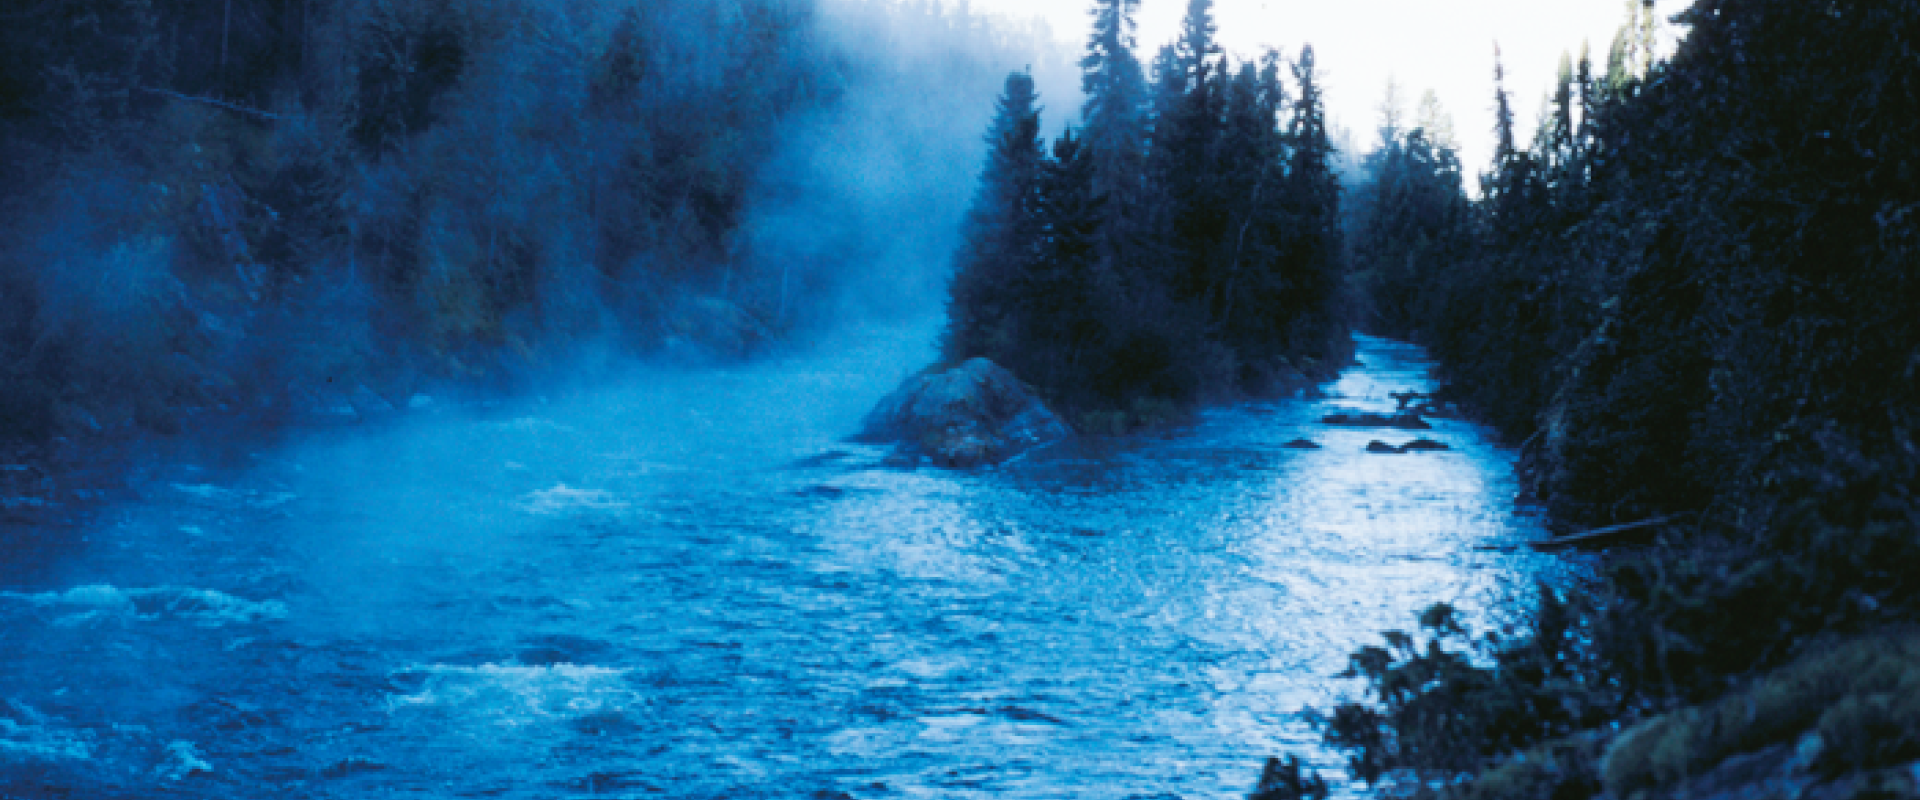 A treed shoreline can be seen along the Hell's Gates Gorge. Mist in the photo makes the lighting appear blue. Rapids can be seen in the water.